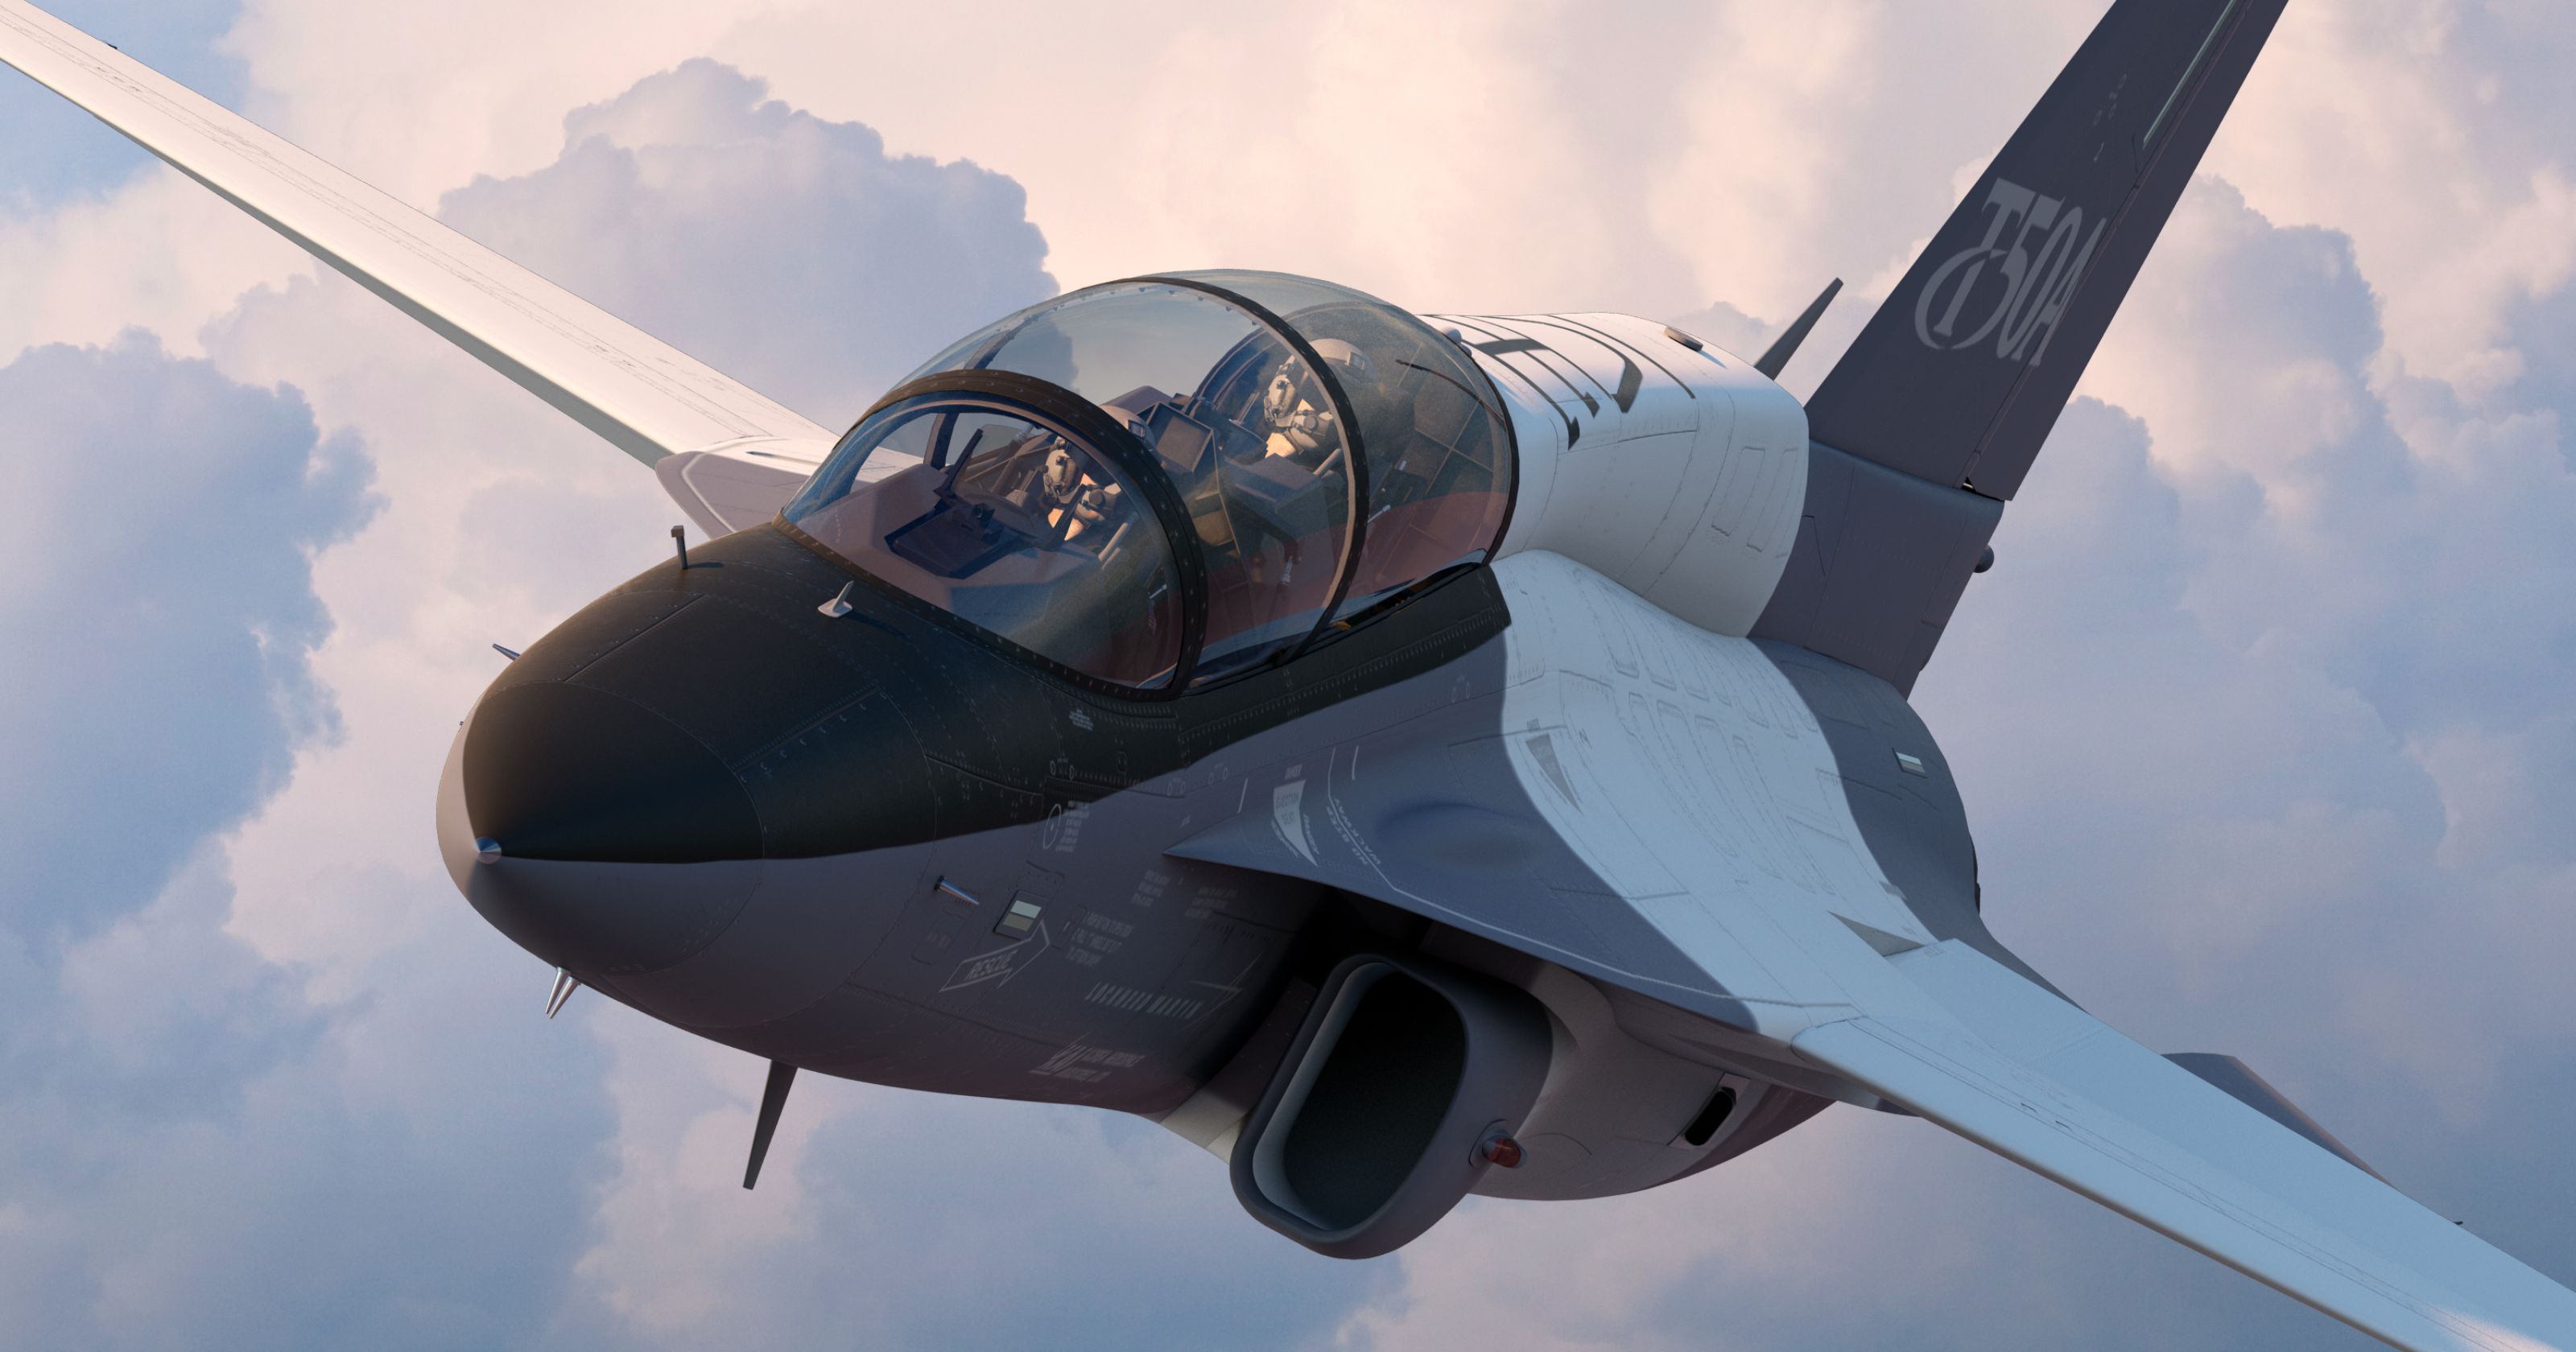 Will Greenville assemble a fighter jet?